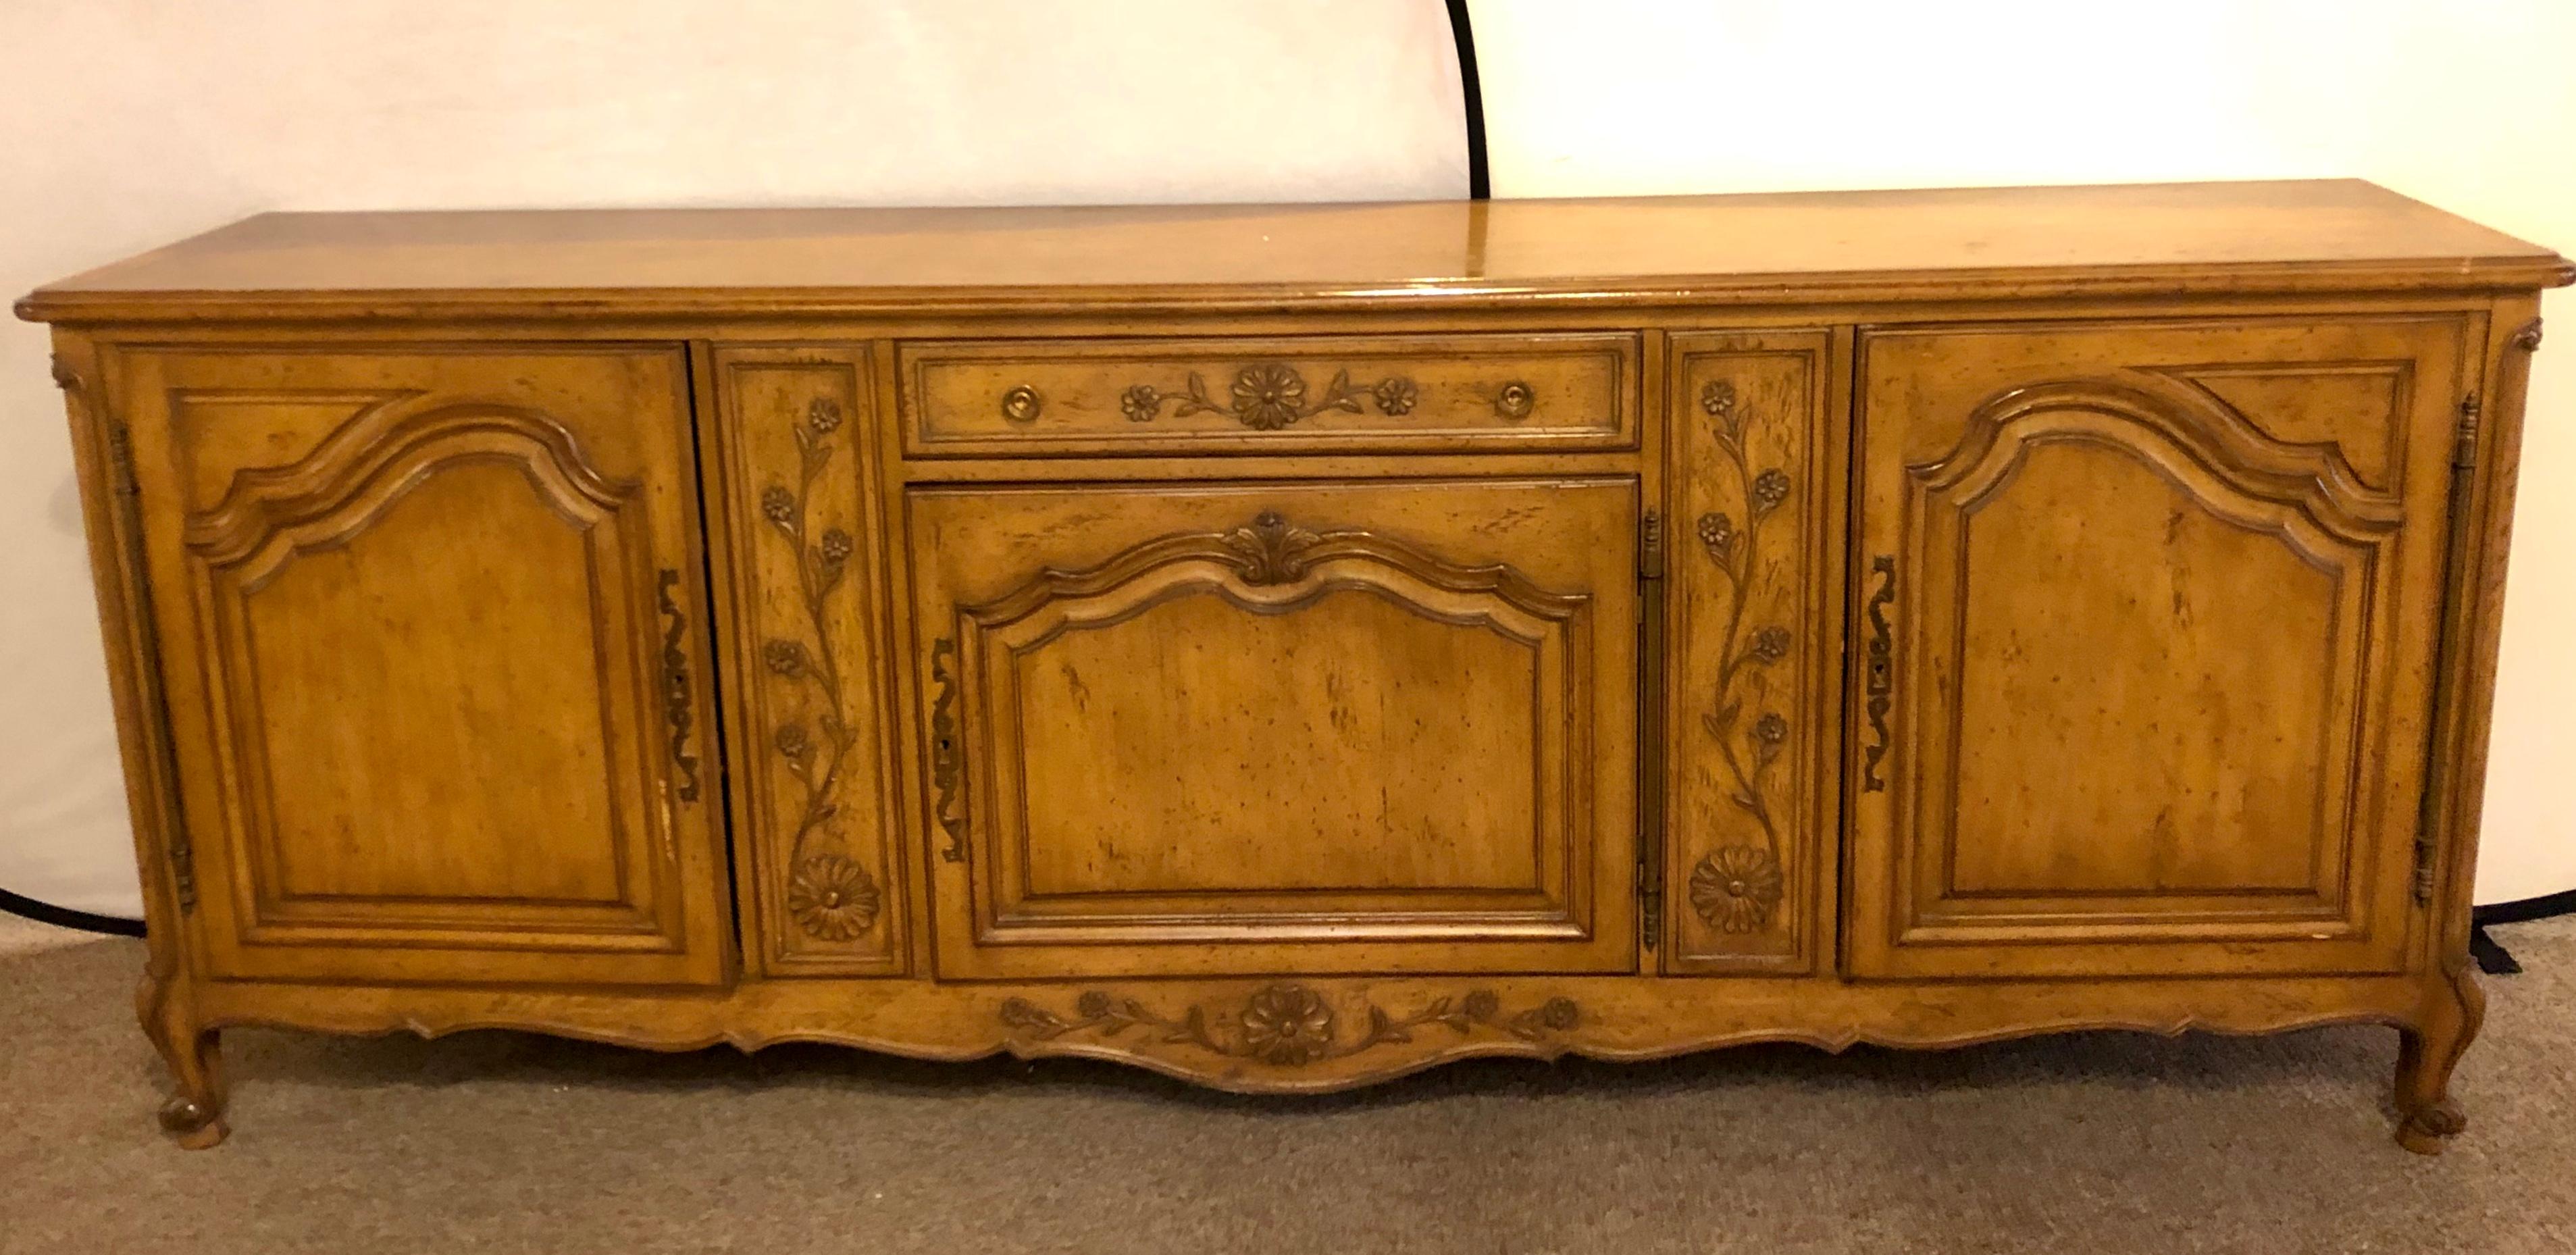 Auffray & Company, 18th century style Country French sideboard / buffet. This spectacular impressive and large sideboard has a center door which leads to three interior drawers the lower two with fitted burgundy velour fittings to hold your